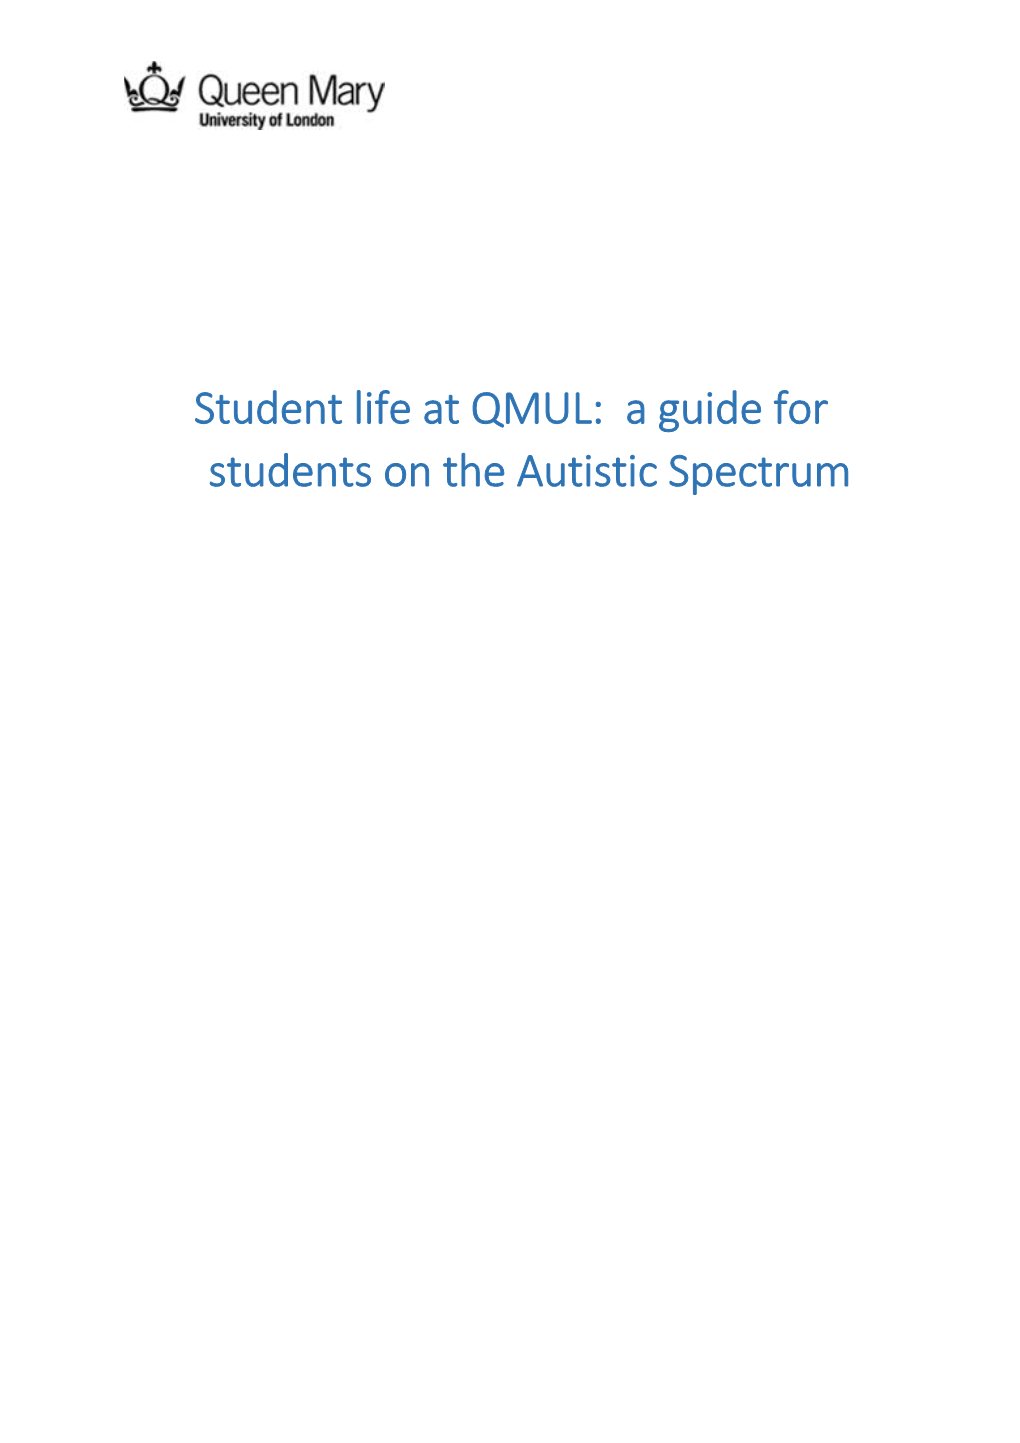 Student Life at QMUL: a Guide for Students on the Autistic Spectrum